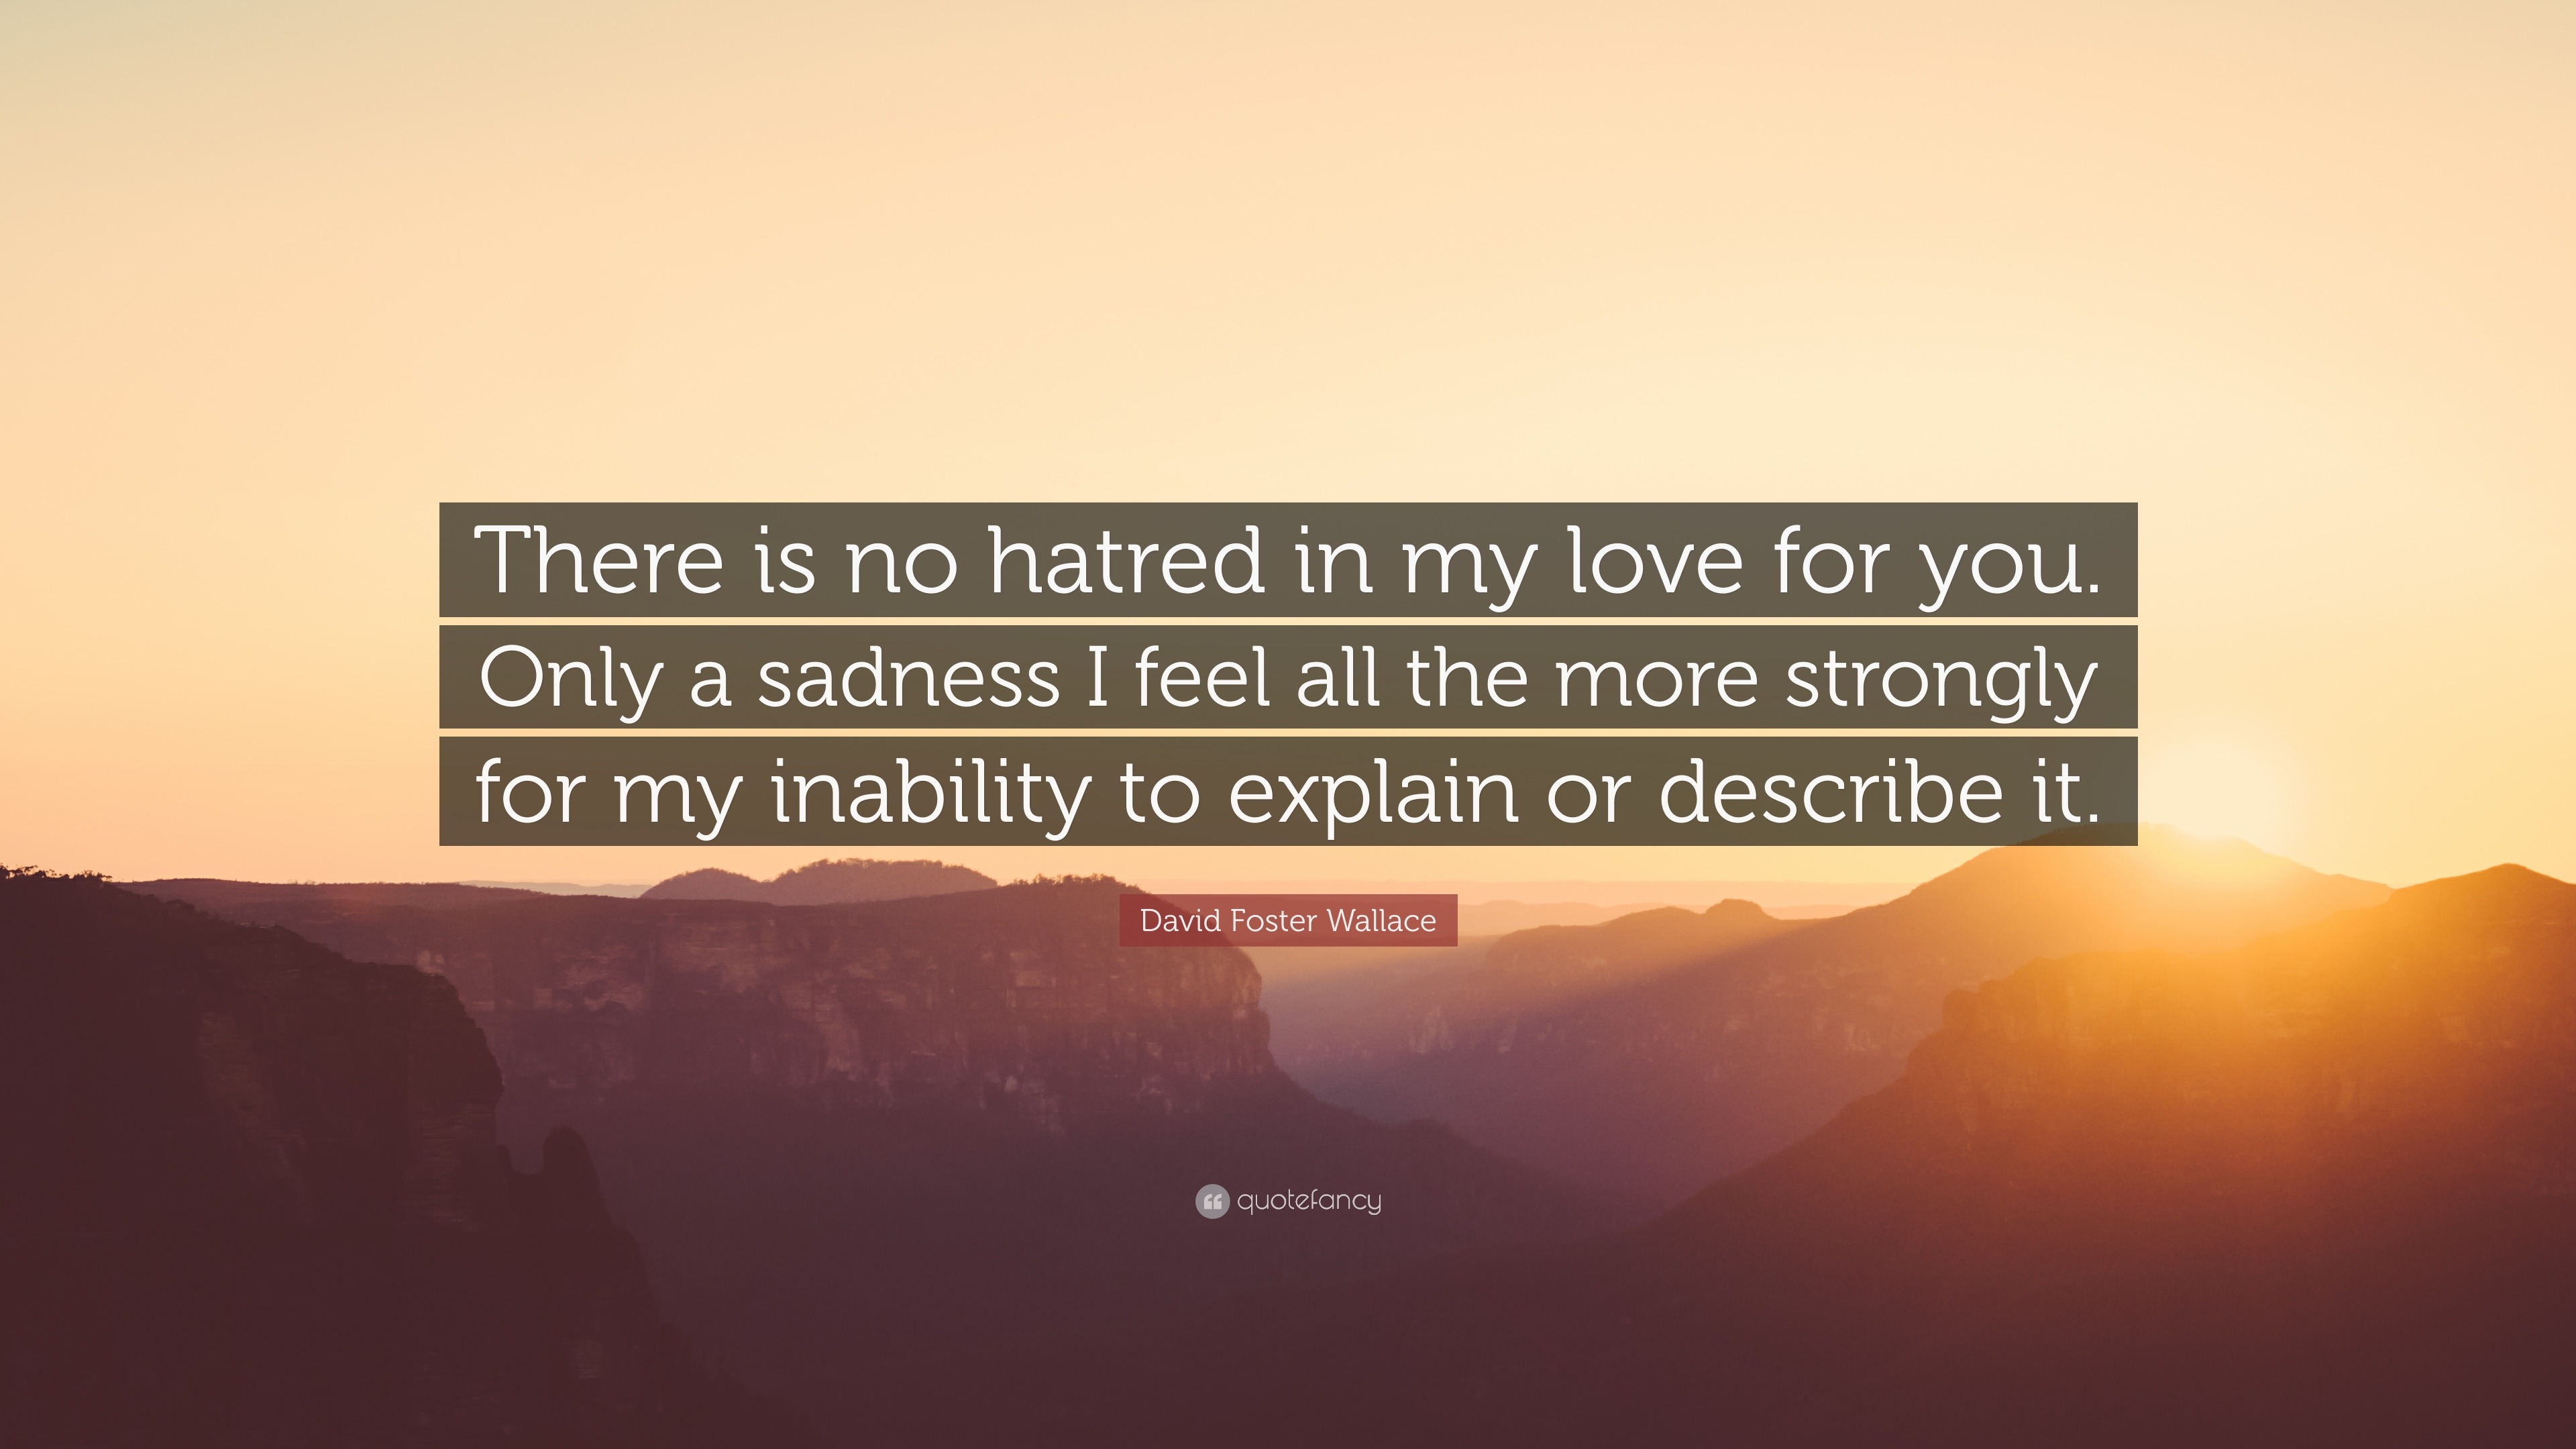 David Foster Wallace Quote “There is no hatred in my love for you